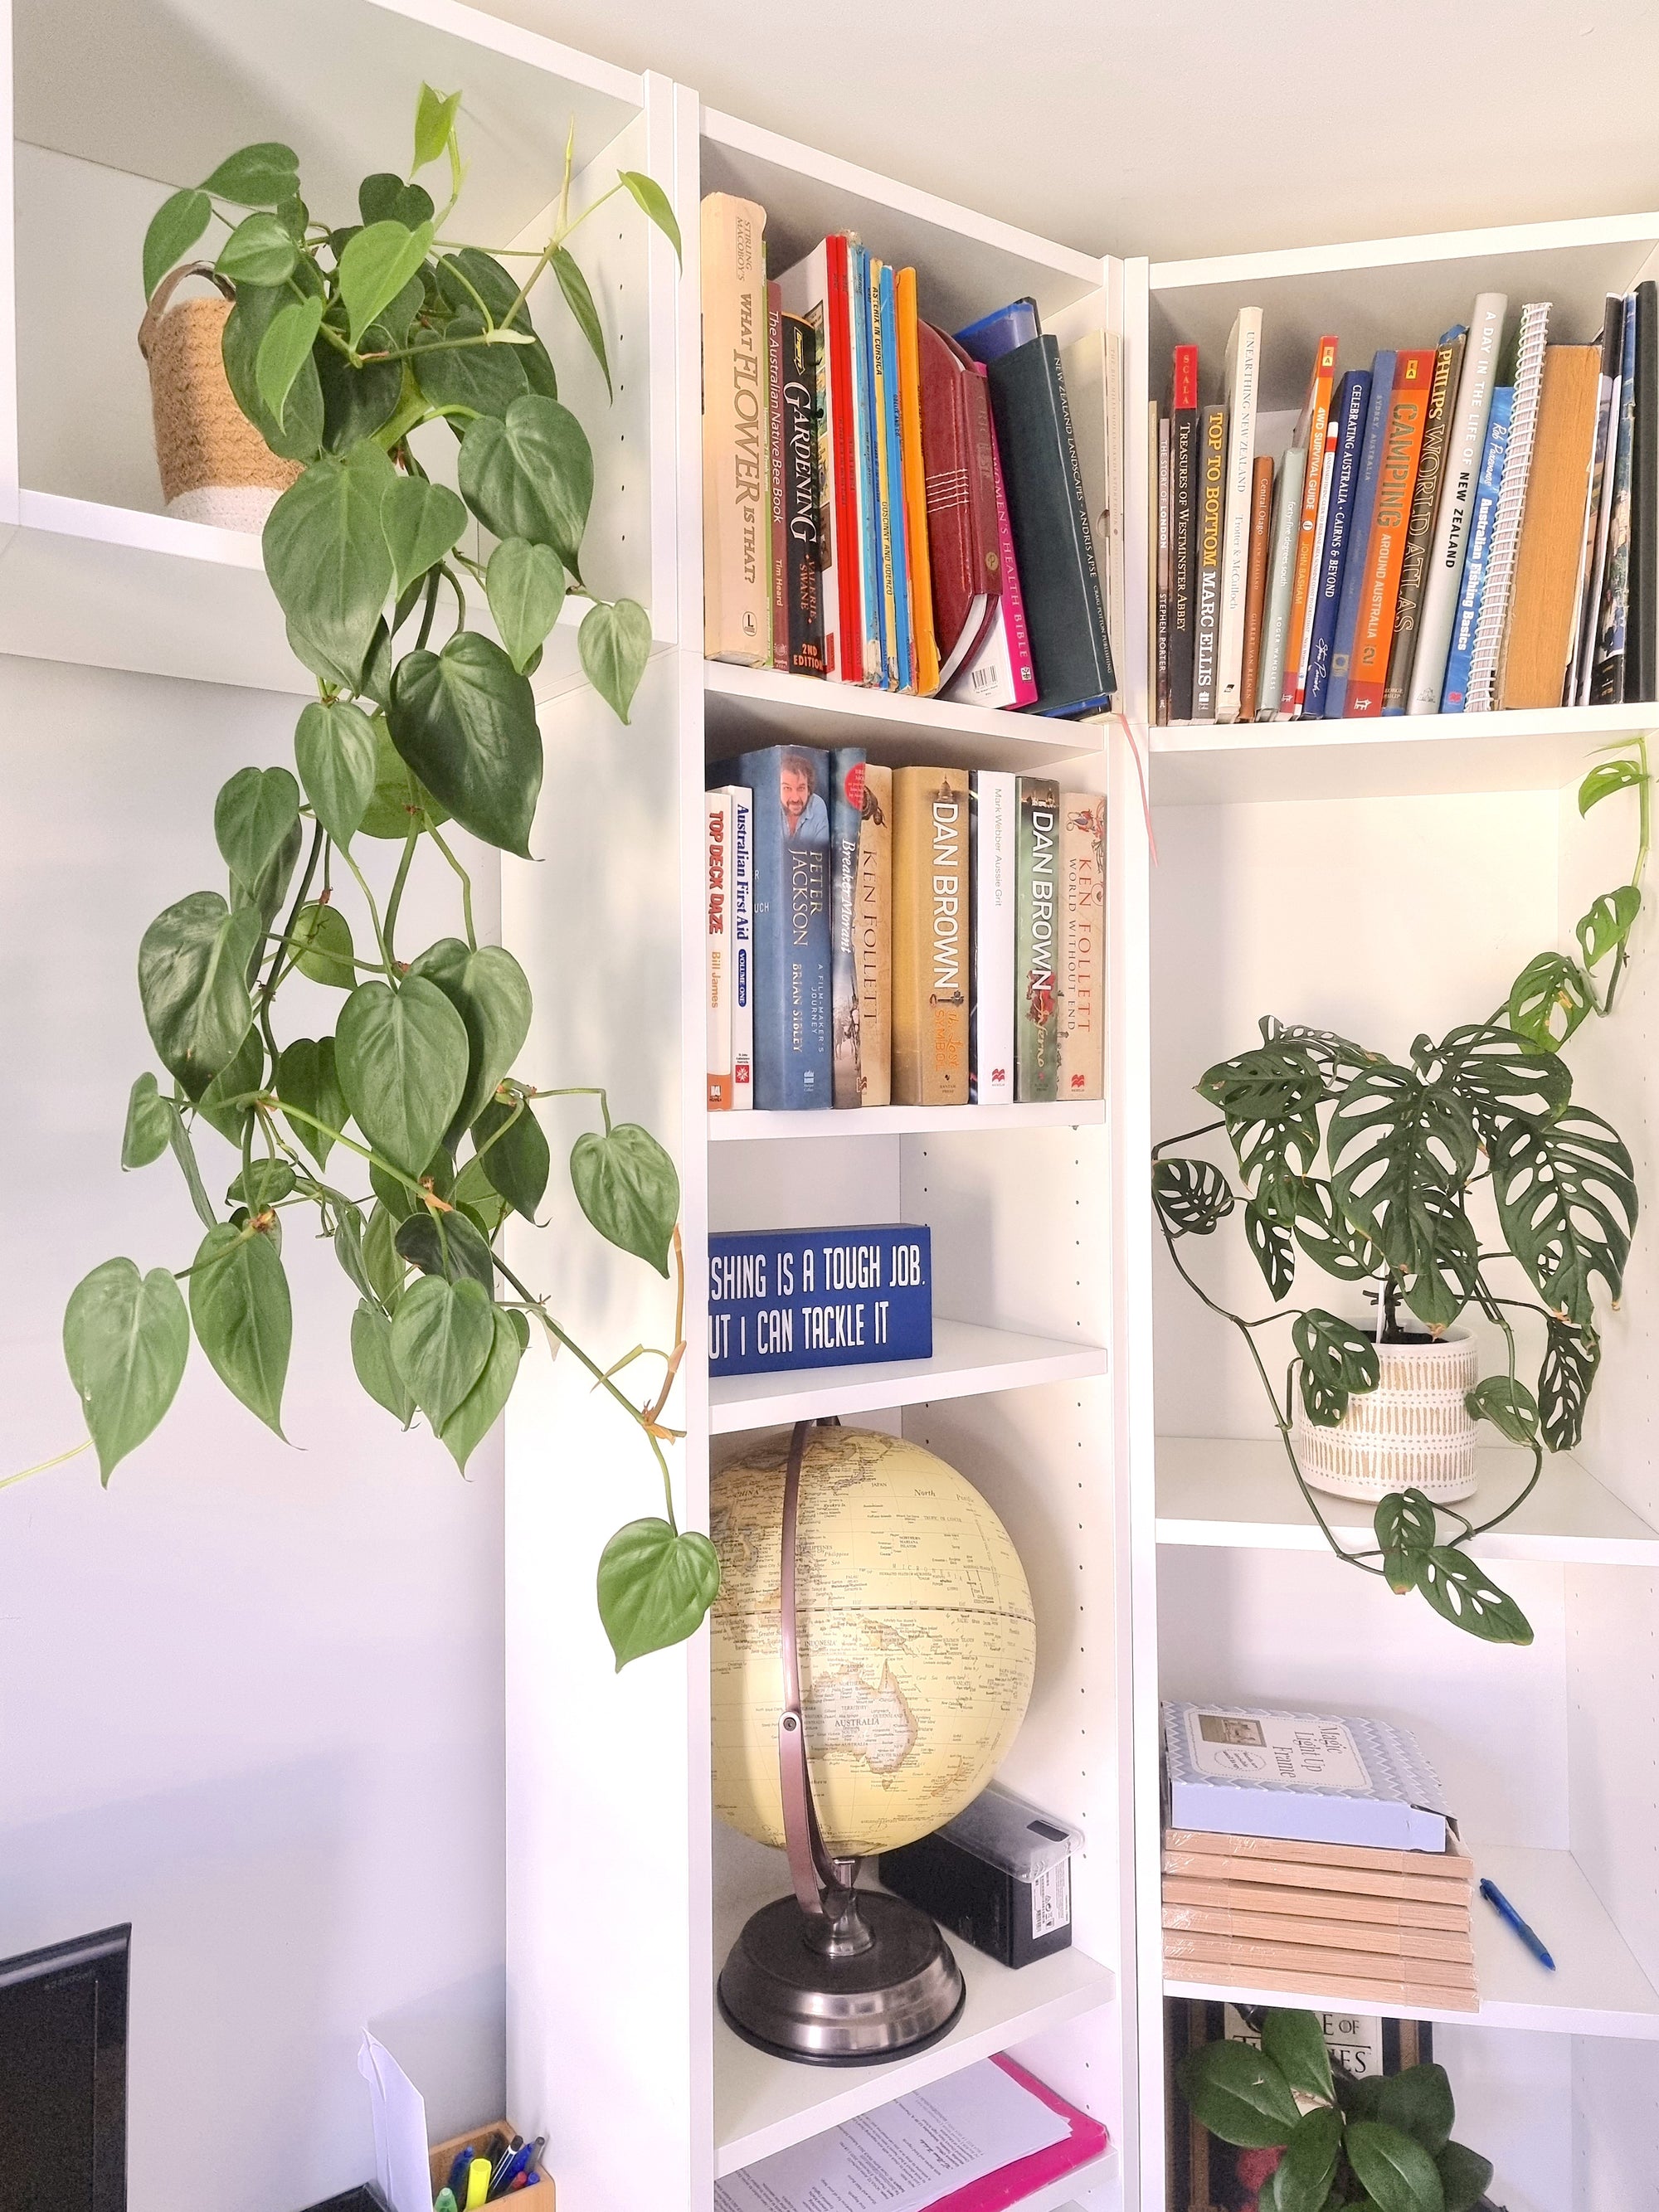 The Power Of Green: Health Benefits Of Indoor Plants For Remote Workers